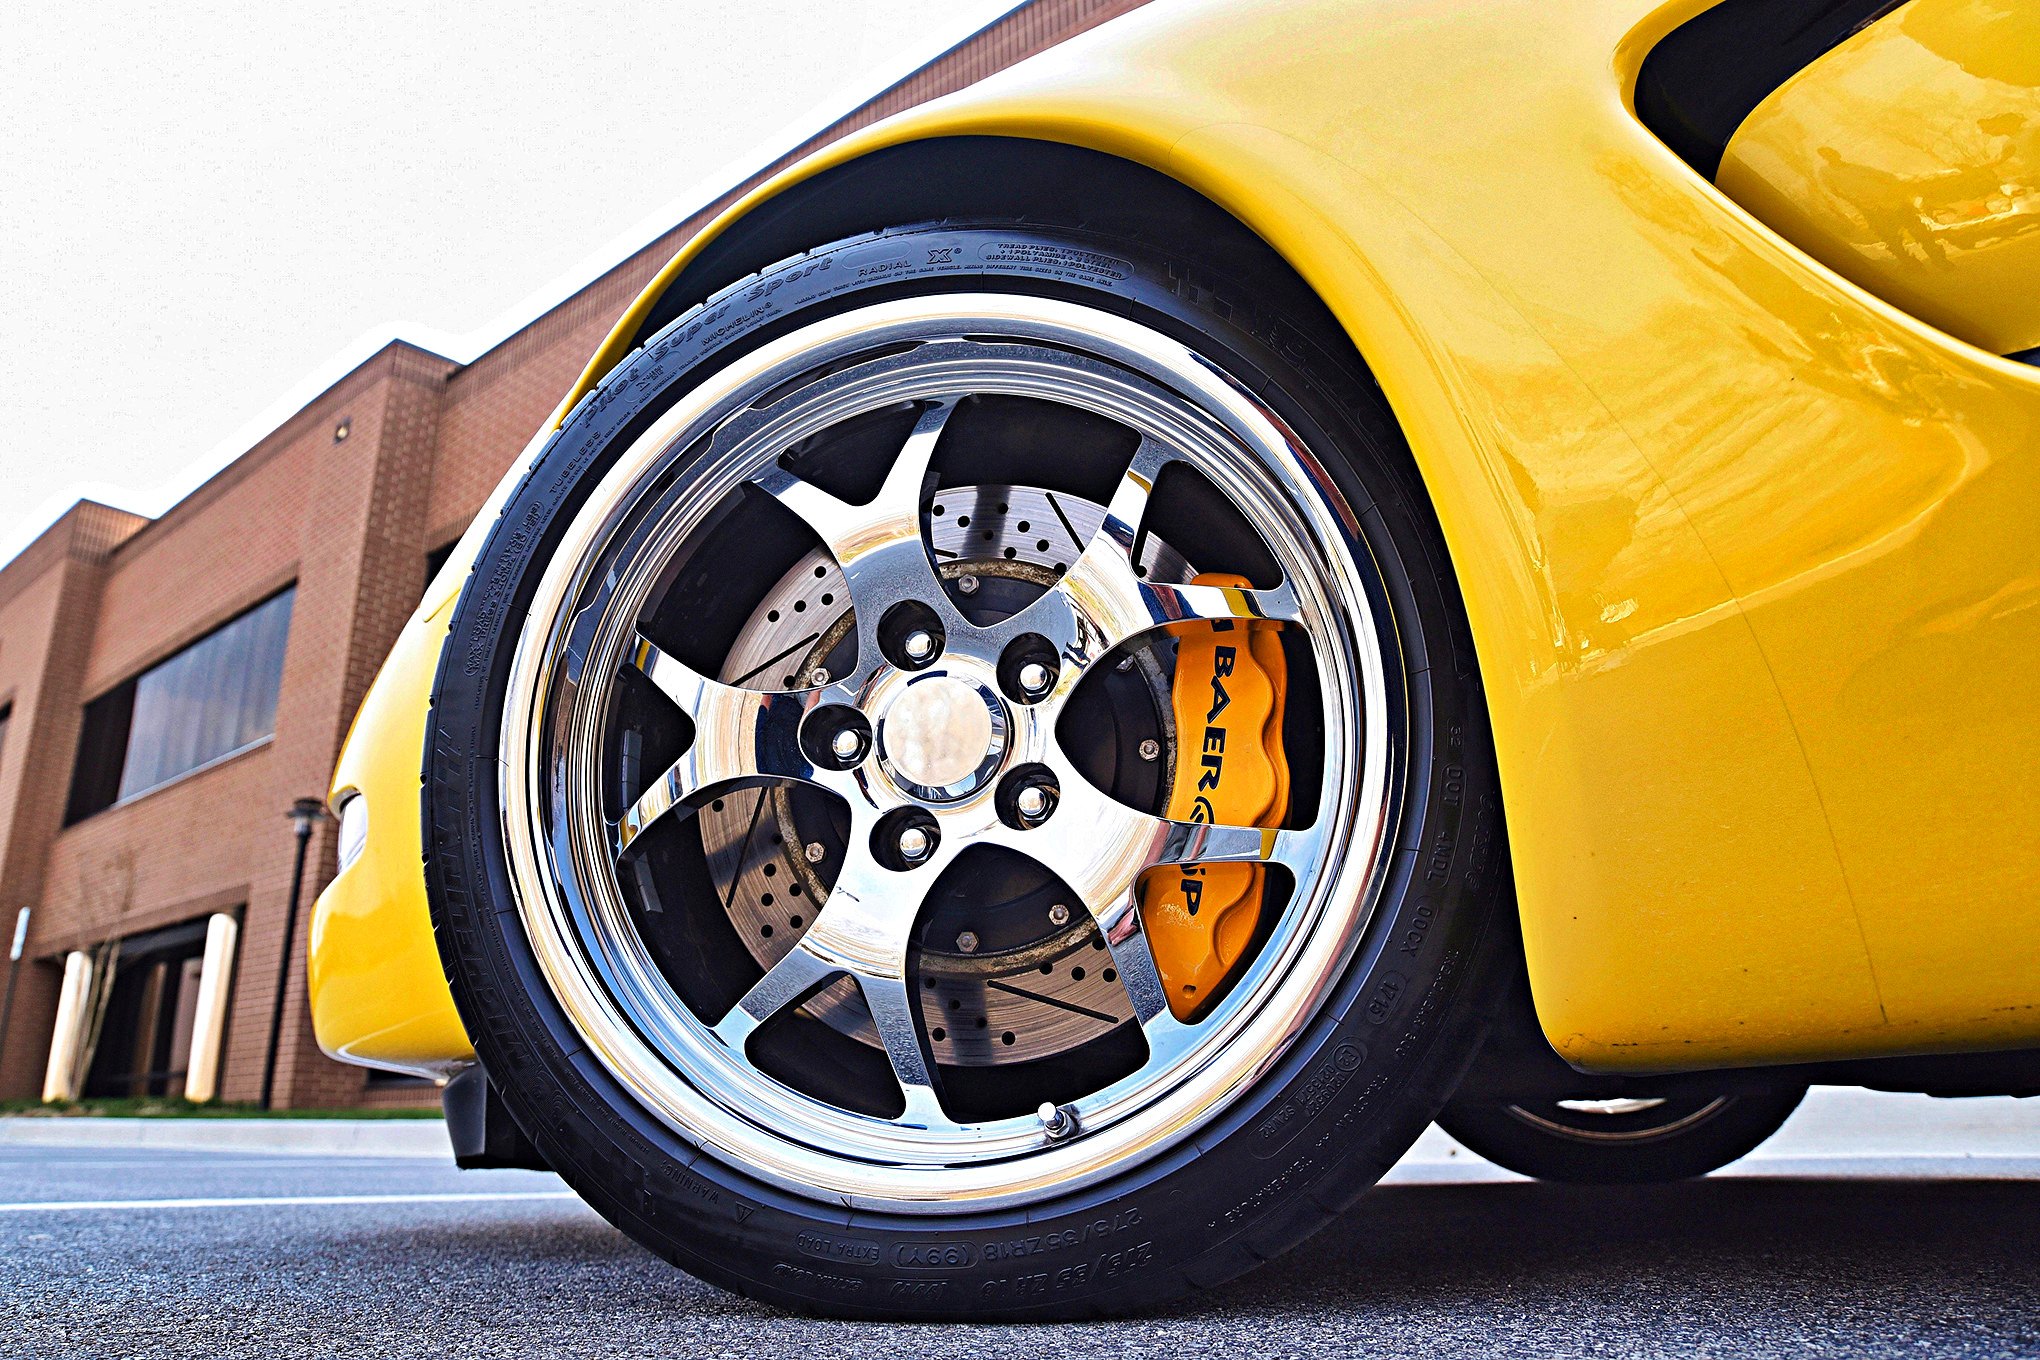 Custom Yellow Chevy Corvette on Michelin Tires - Photo by Scotty Lachenauer